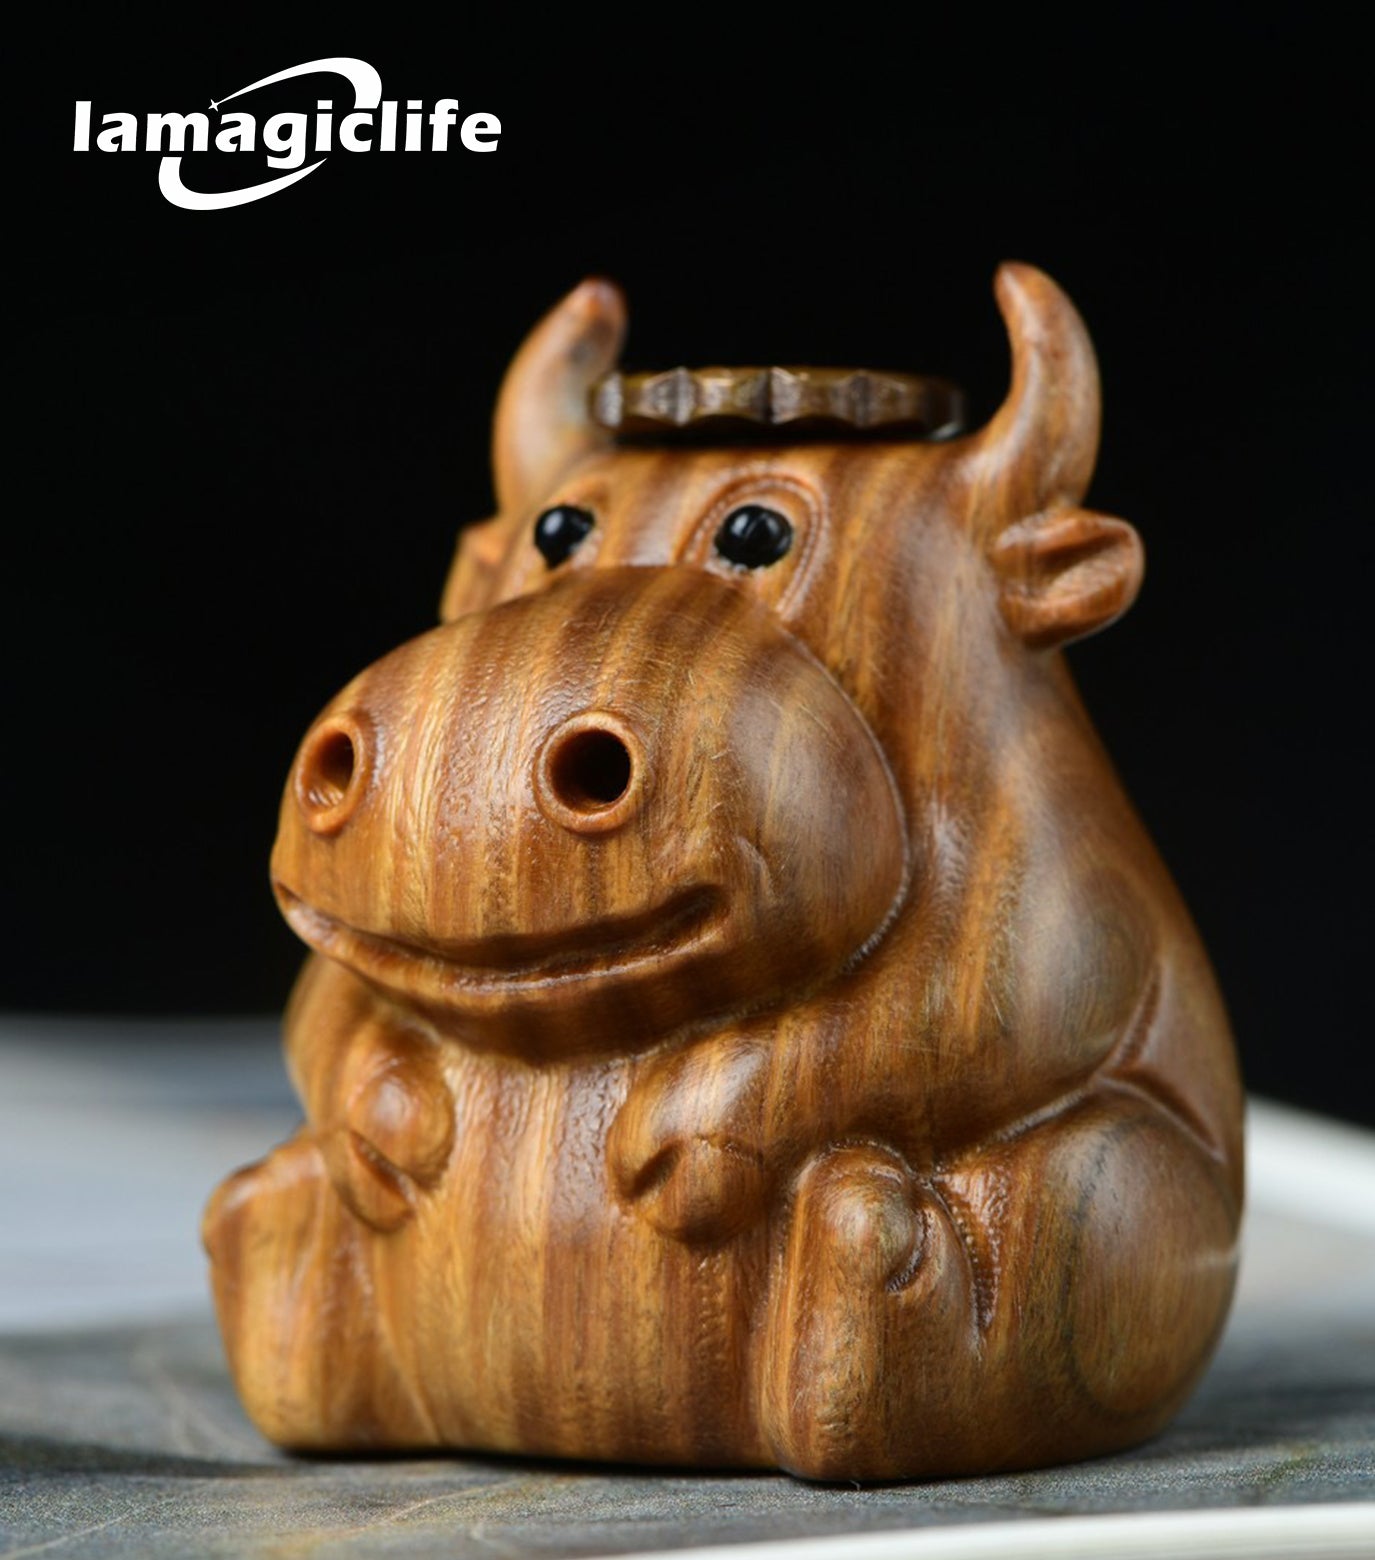 Lamagiclife Green Sandalwood Little Calf Handcrafted Natural Wood Home Decor Toy